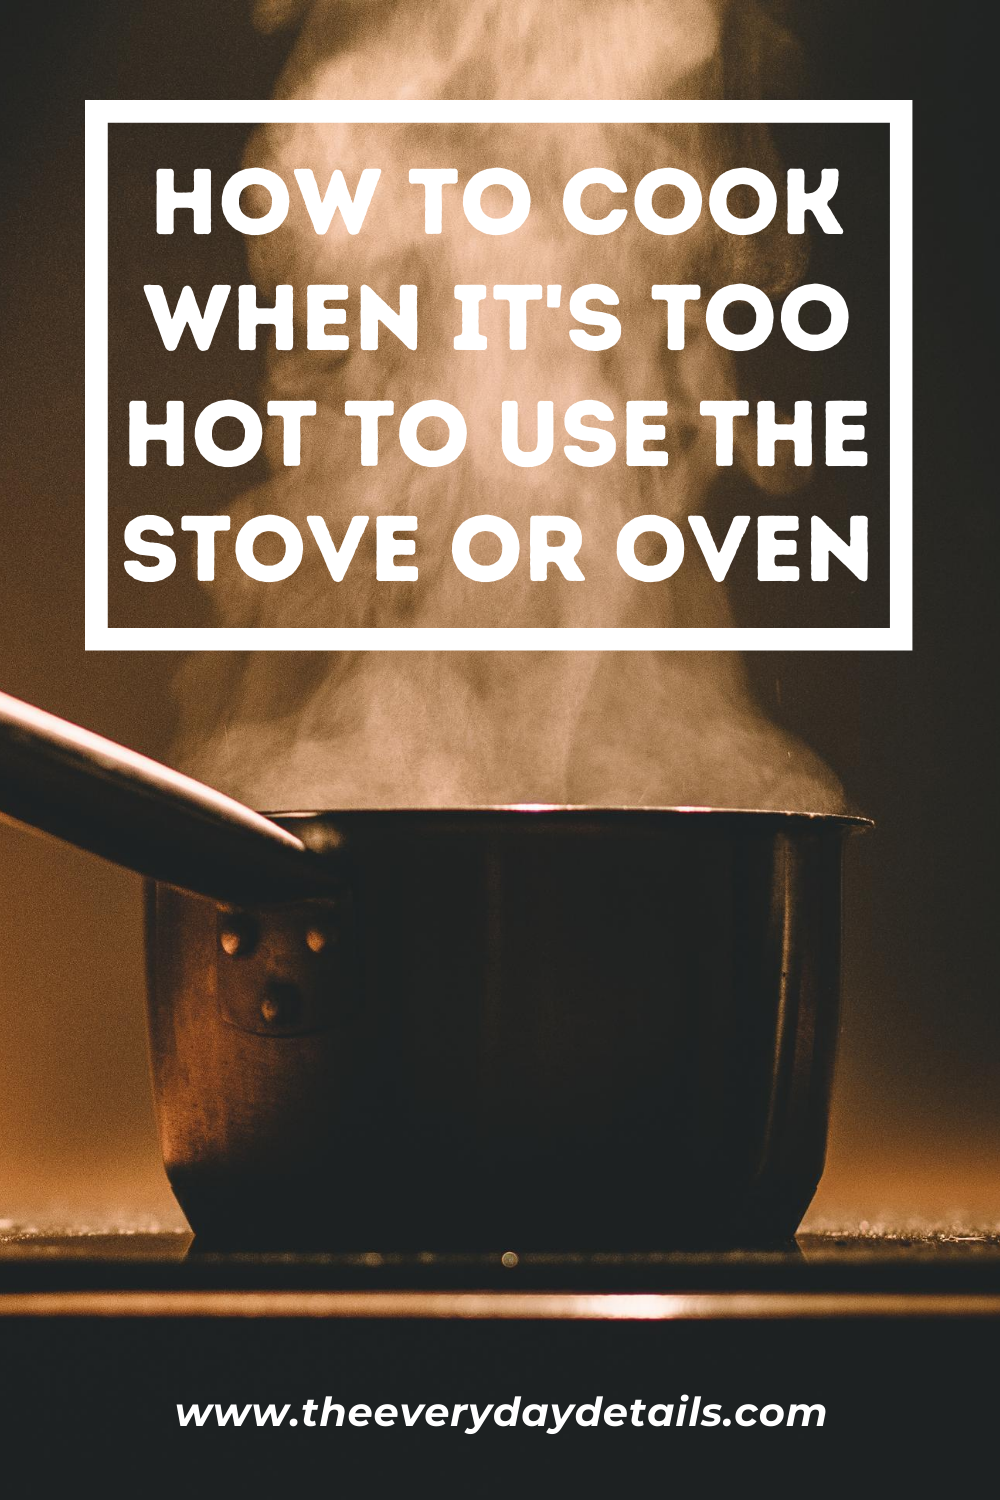 How to Cook Food Without a Stove or Oven